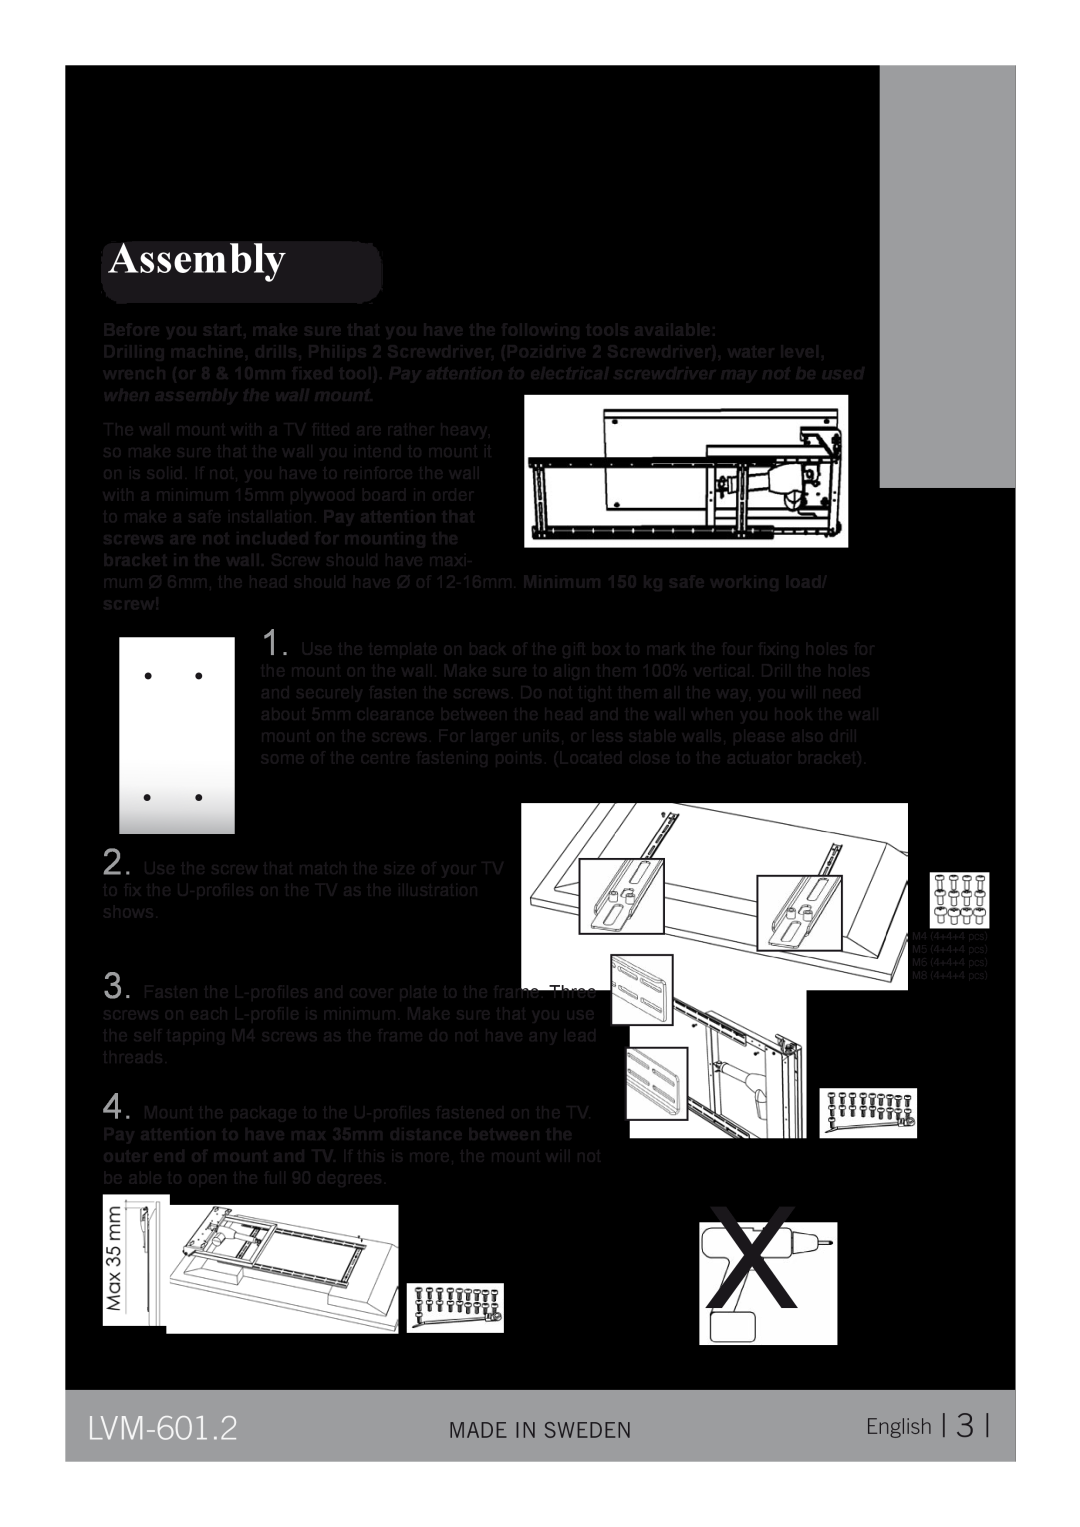 CLO Systems LVM-601-2 manual Assembly, LVM-601.2, English 